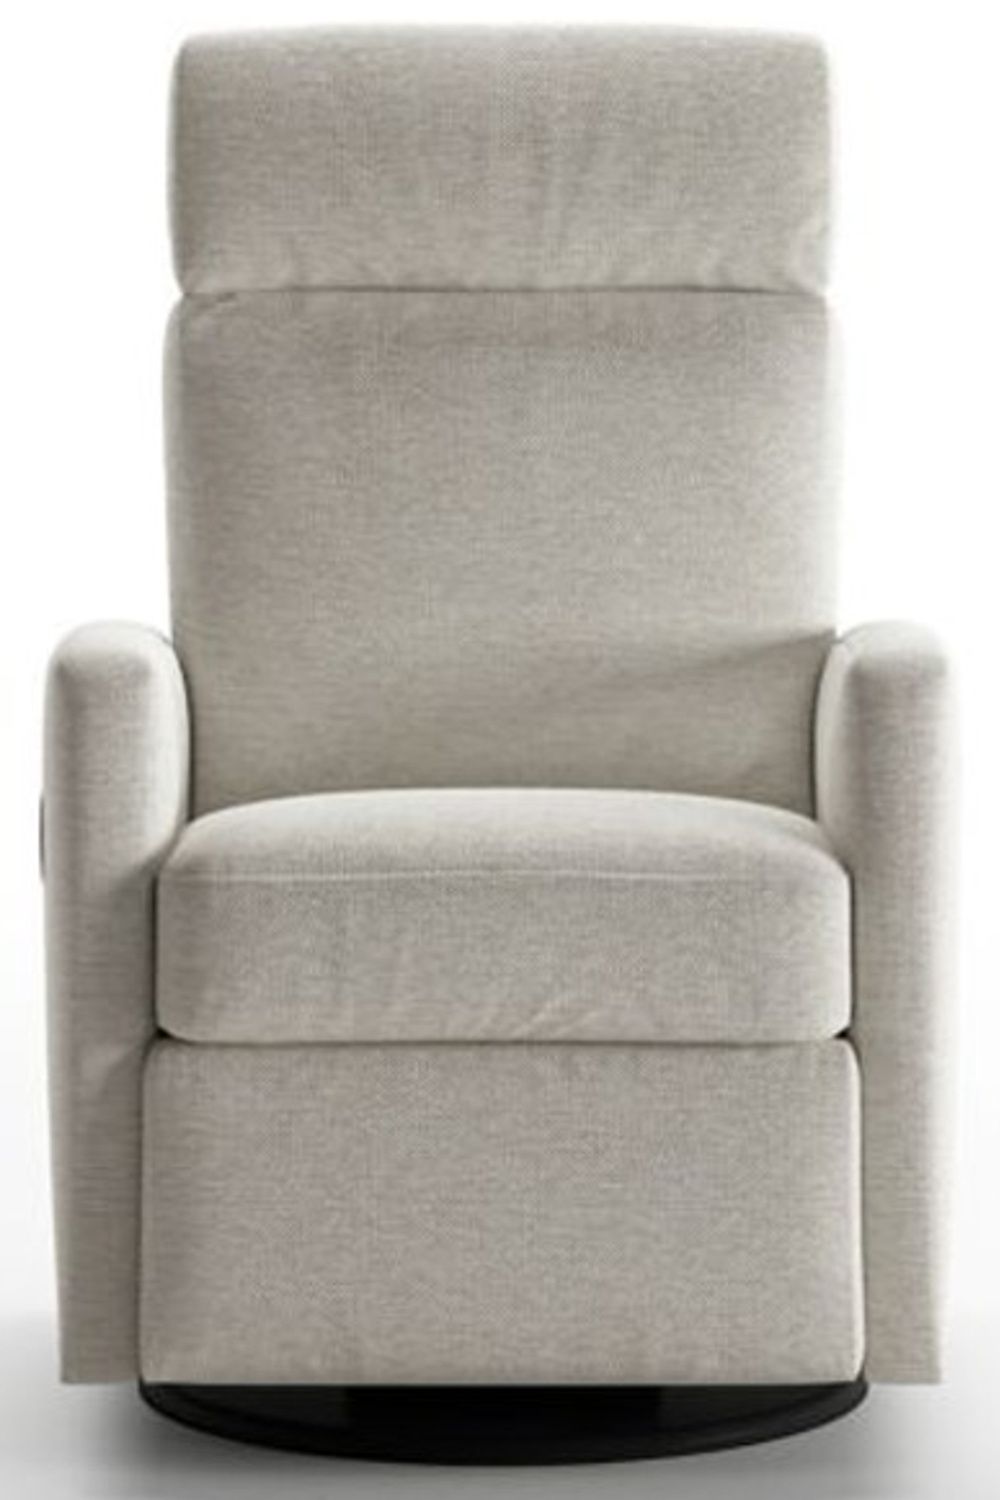 The Ultimate Comfort: Why You Need an Adjustable Glider Recliner in Your Home